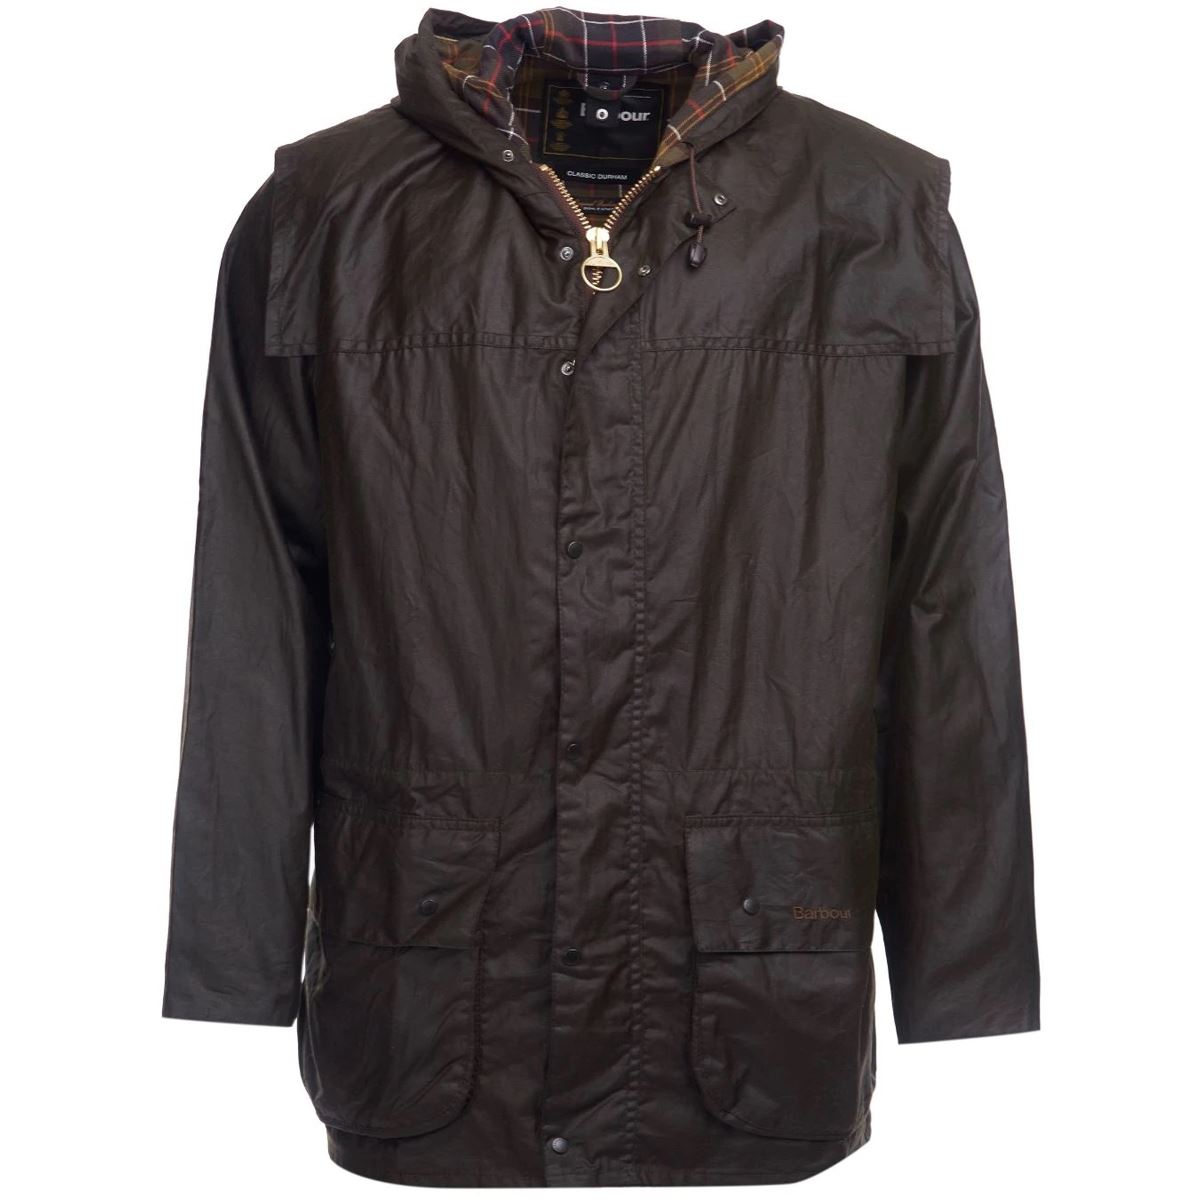 Is the Barbour Durham Jacket appropriate for all seasons?